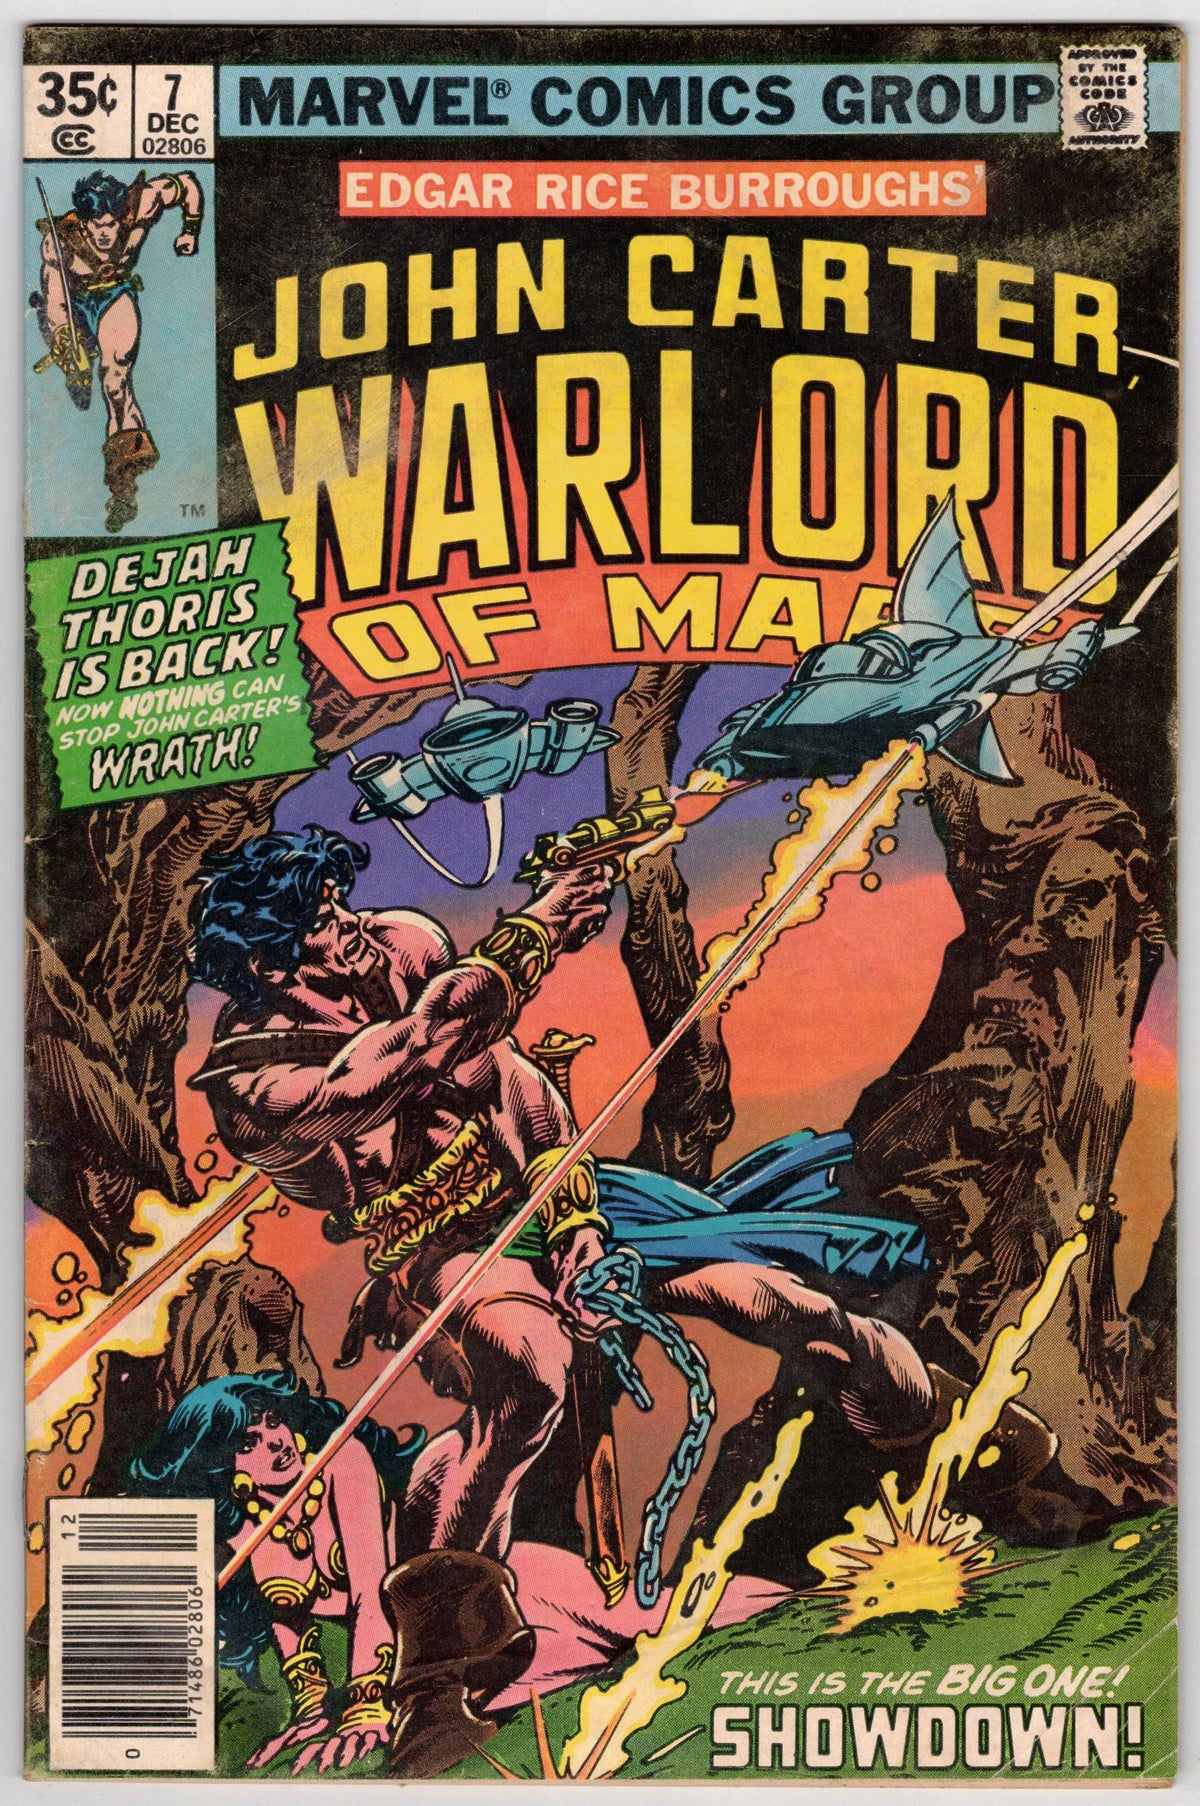 Photo of John Carter, Warlord of Mars (1977) Issue 7 - Very Good Comic sold by Stronghold Collectibles